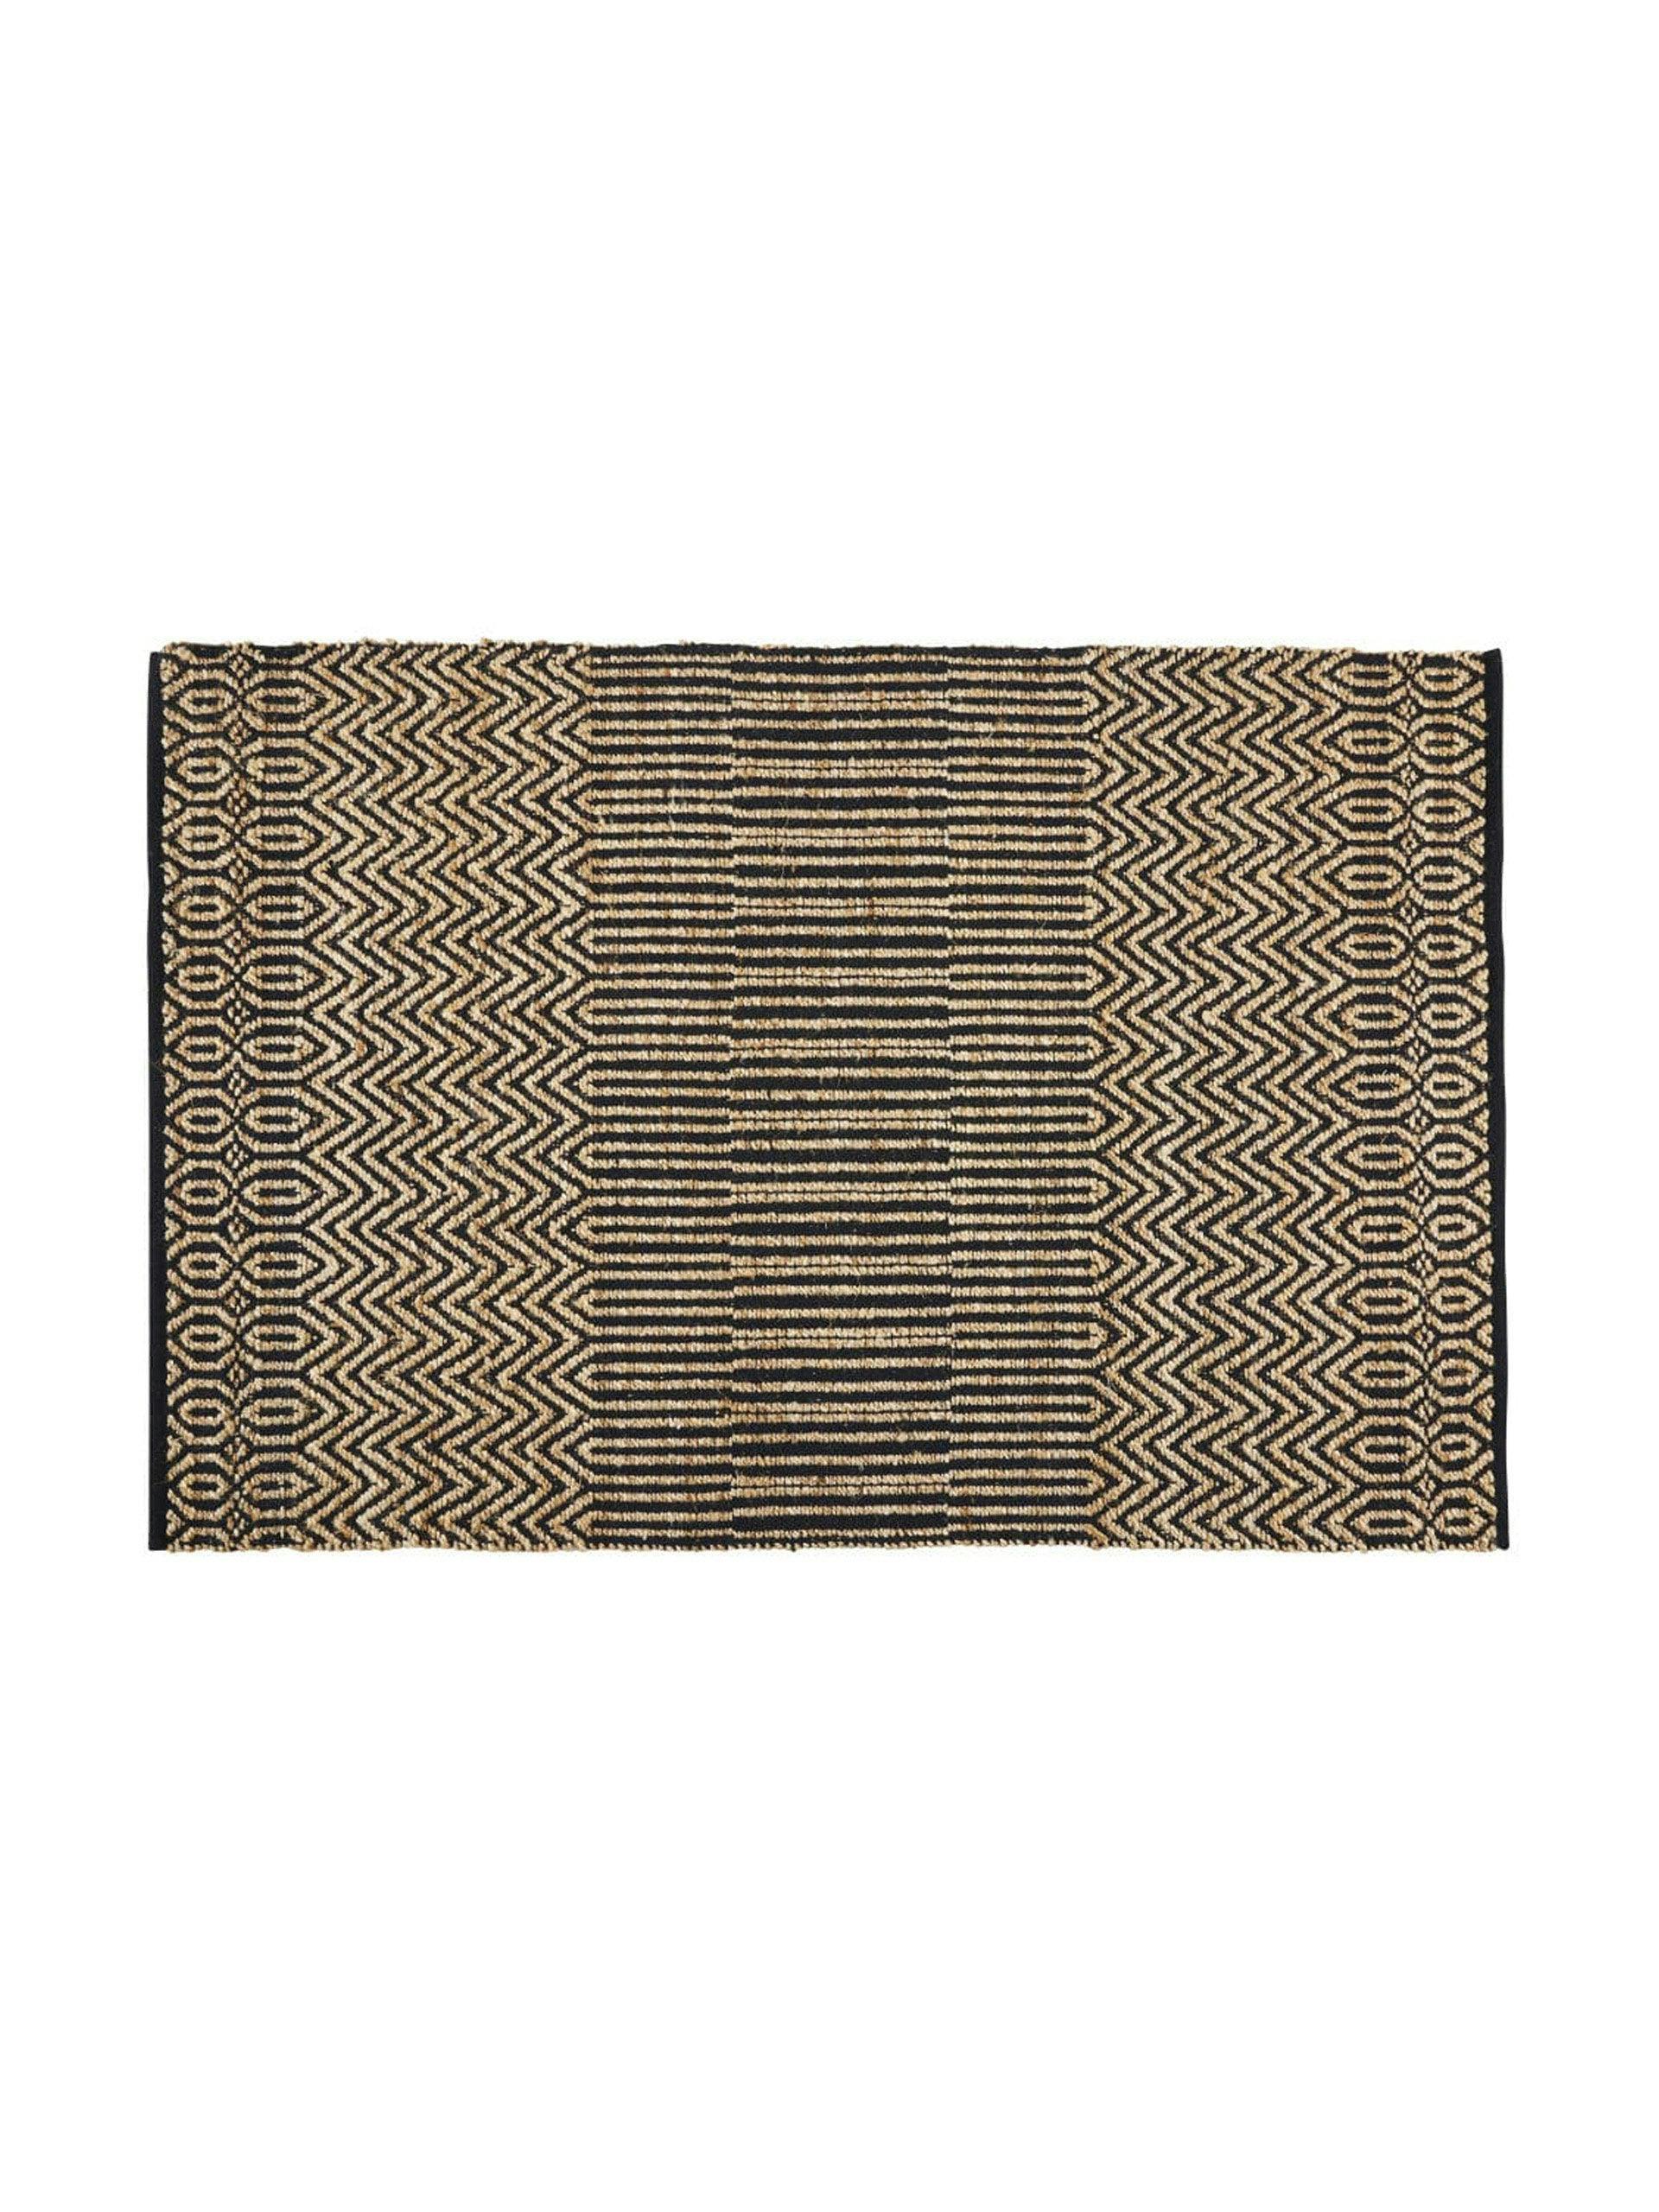 Zig-zag graphic patterned cotton and jute rug